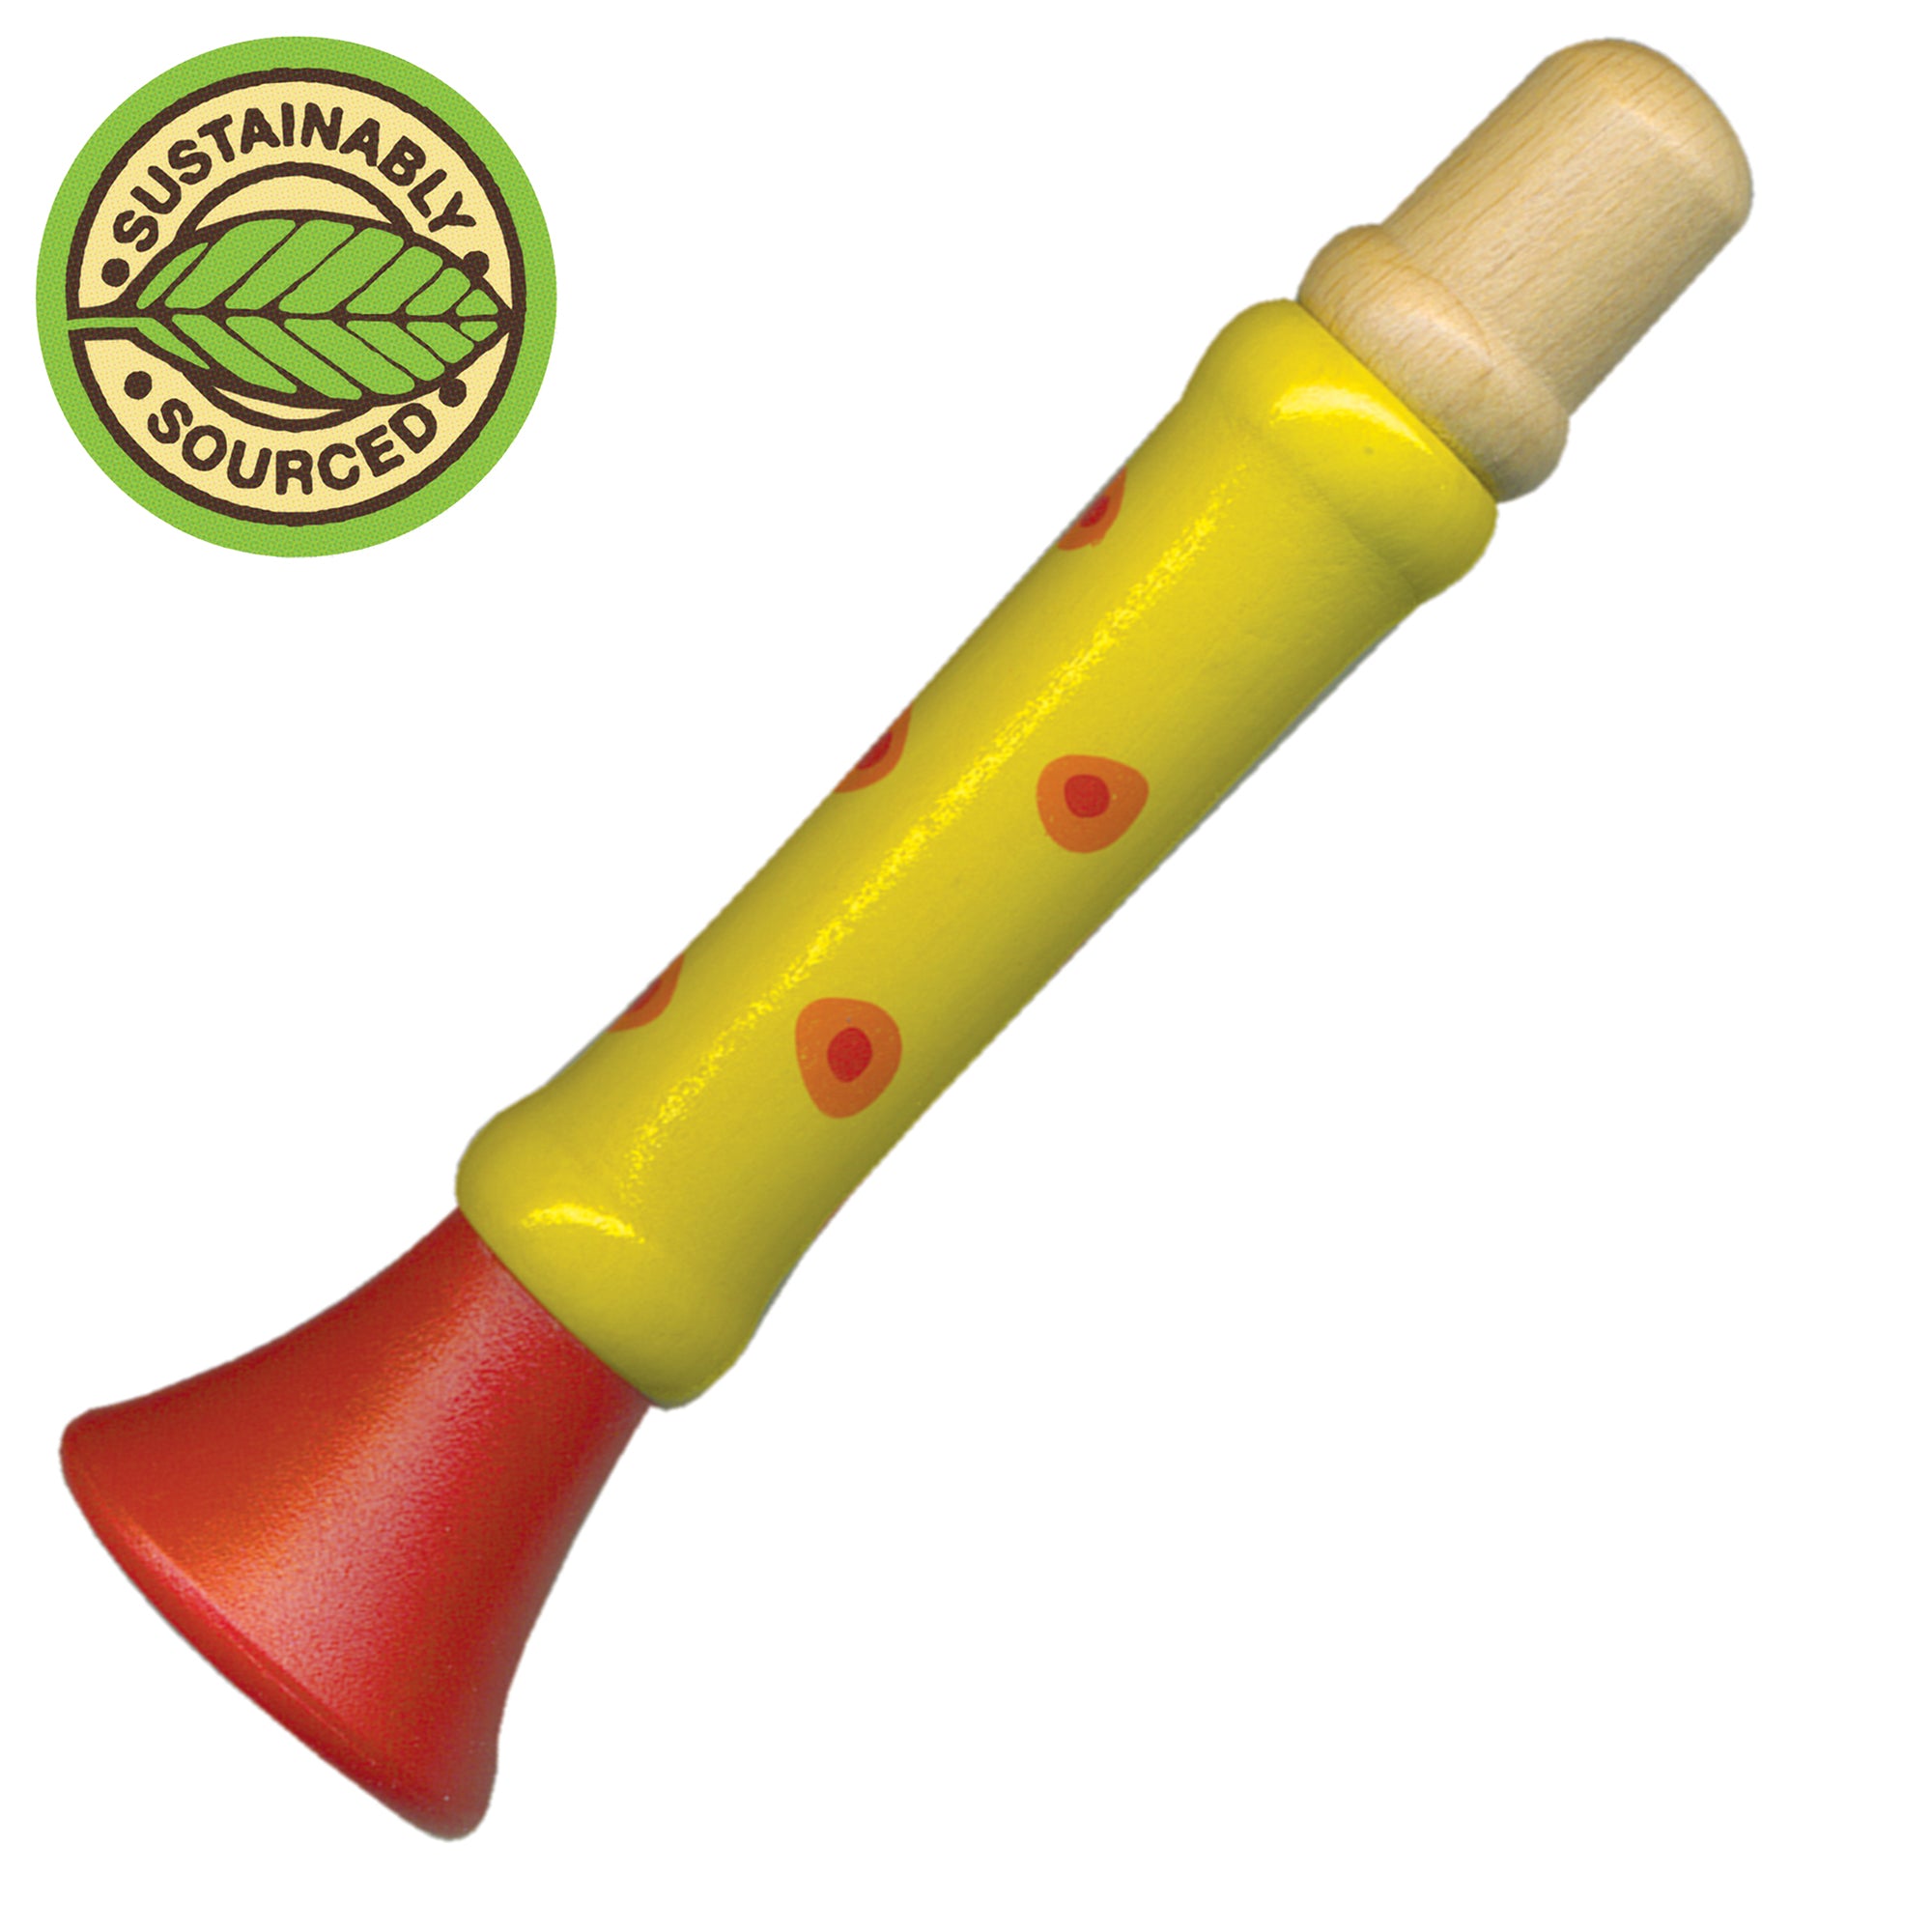 Wooden Toot Flutes - Hpuse of Marbles